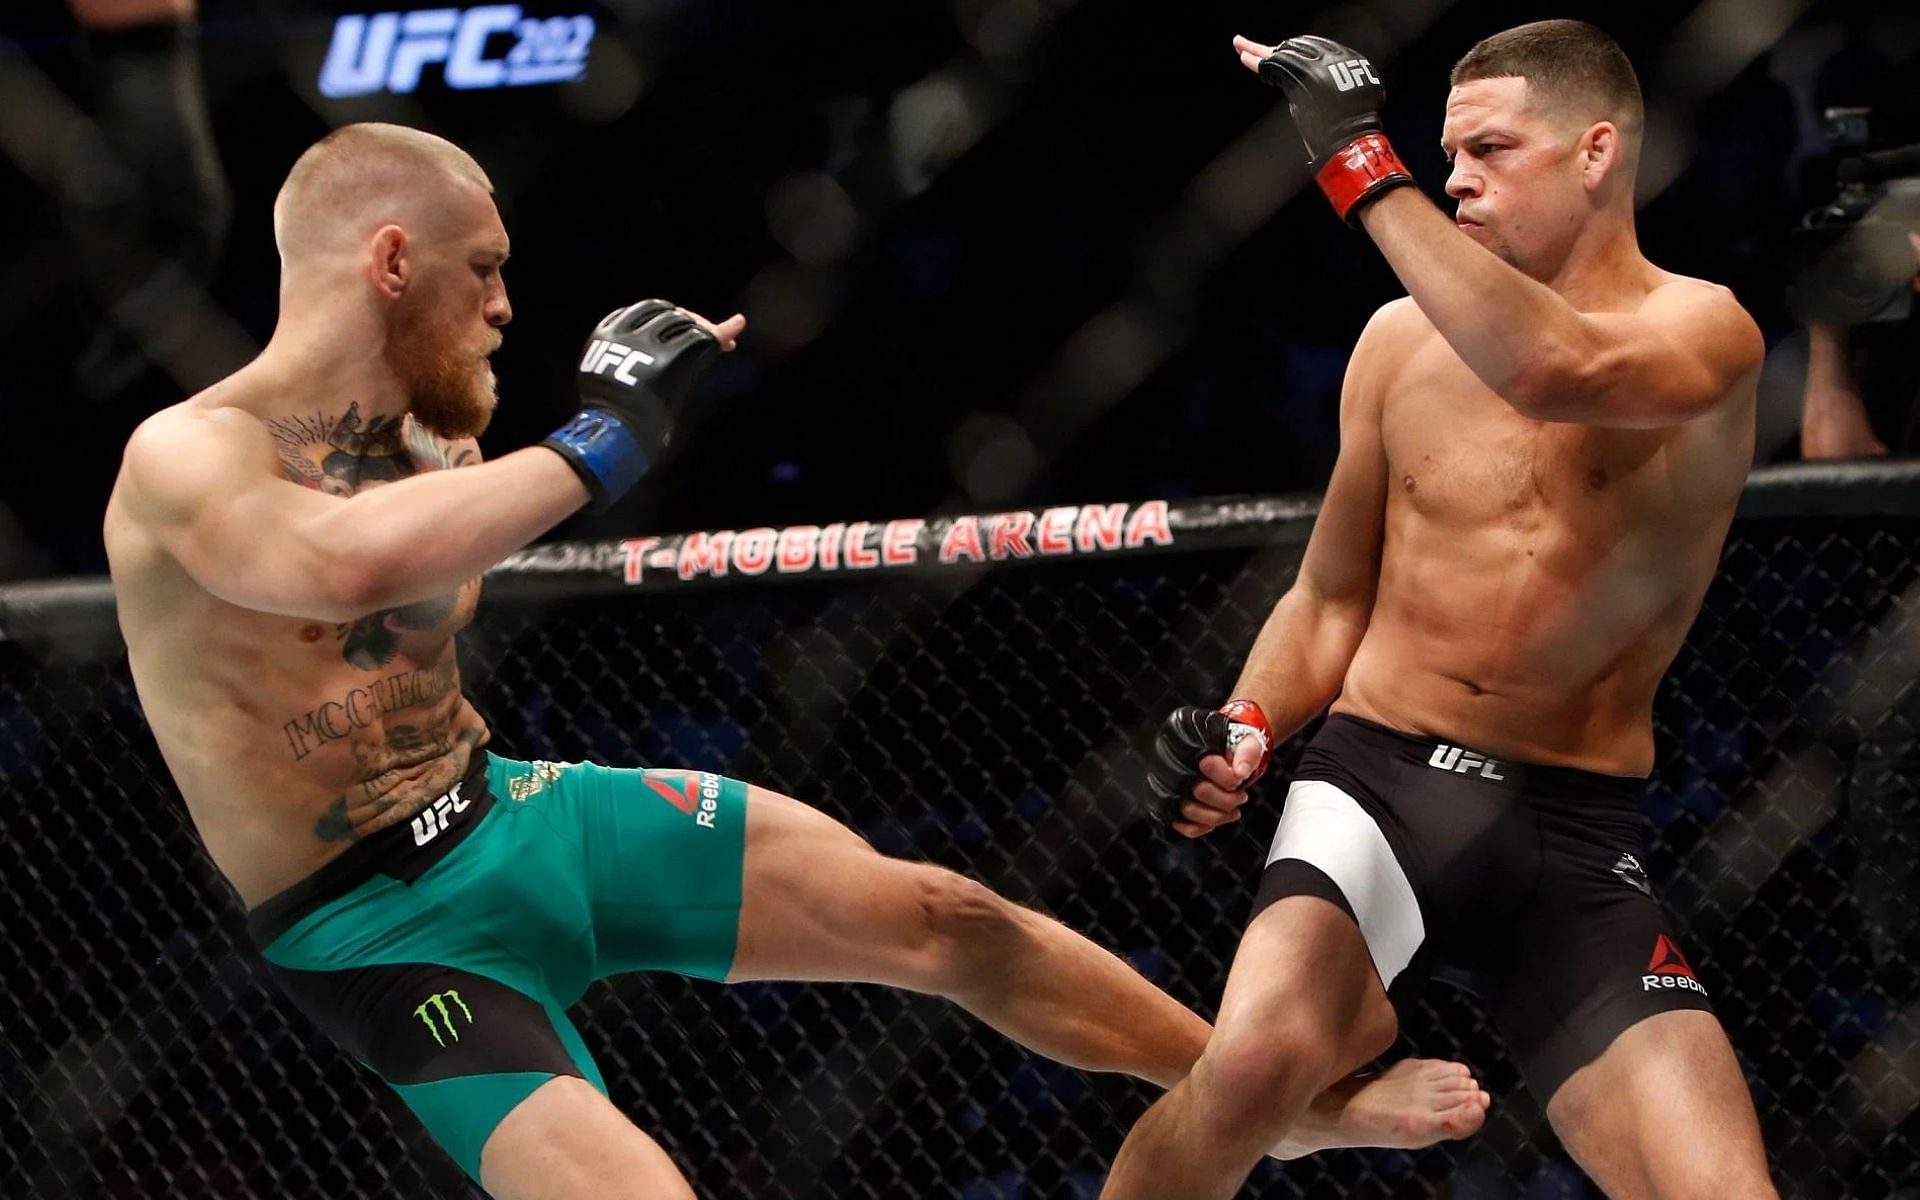 Conor McGregor and Nate Diaz have shared the octagon twice previously, with both men winning one fight each